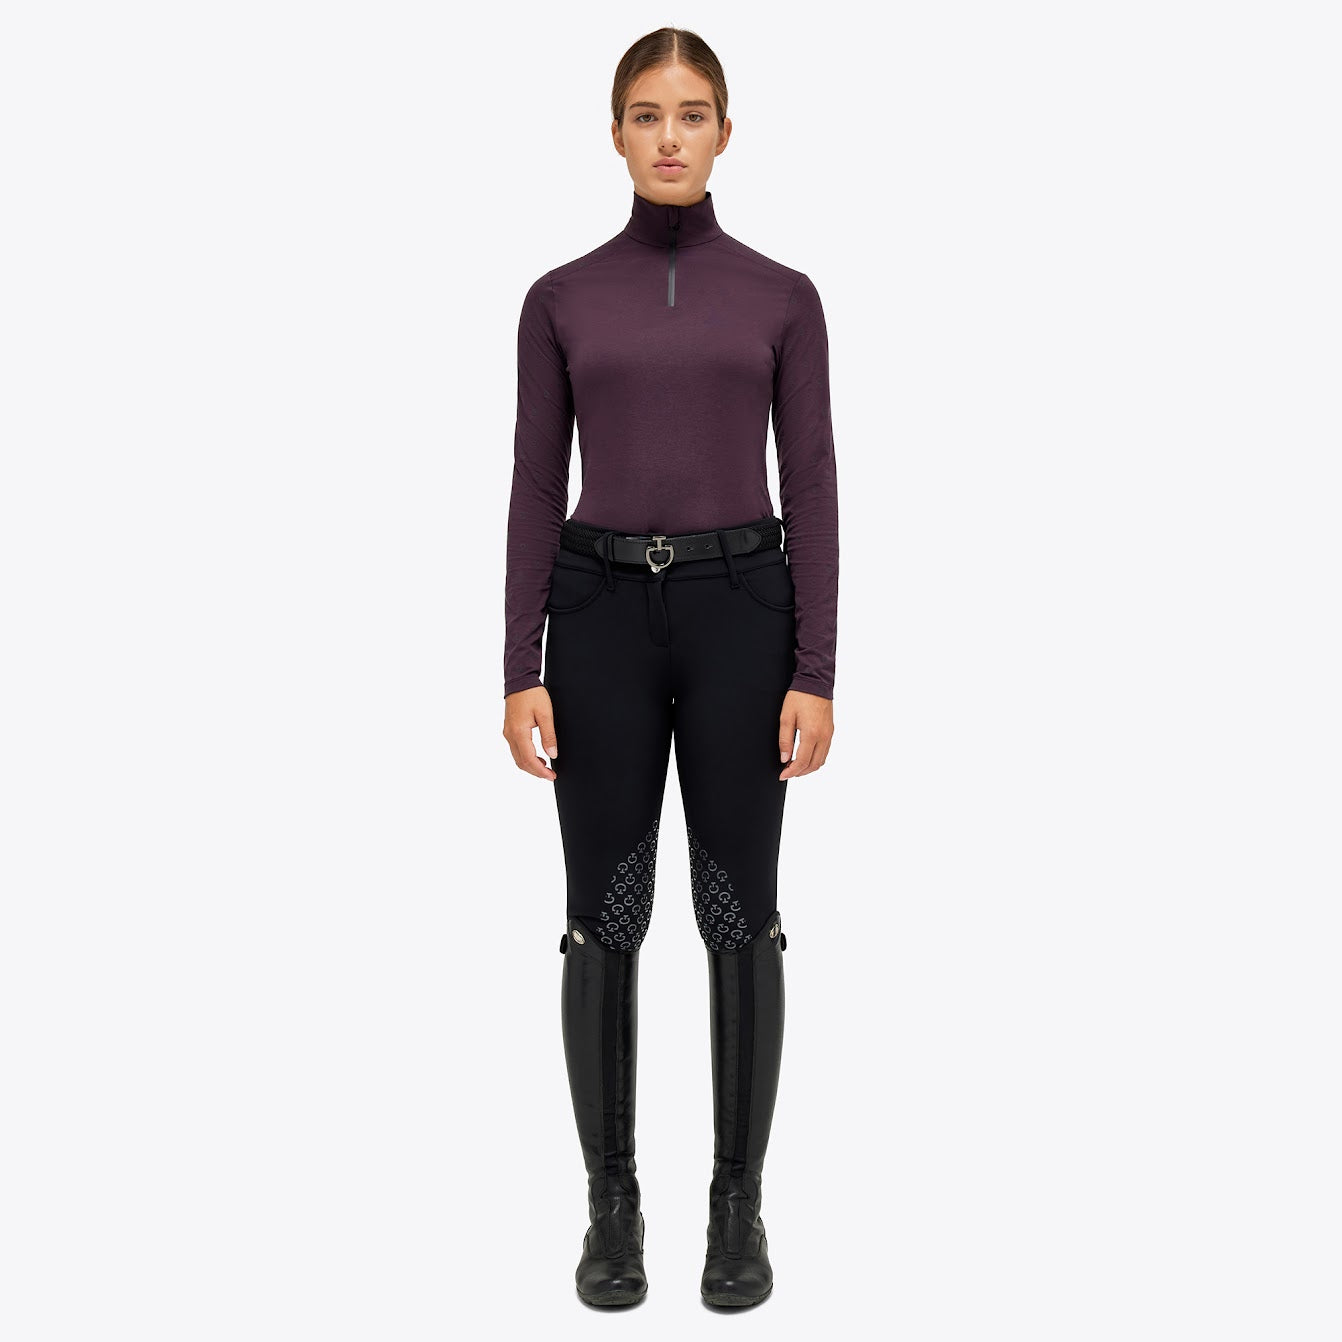 The Cavalleria Toscana plum Mini Flock Print Tech Wool Training Top is perfect for the season. The training top has a mini CT flock logo print on the shoulders and sleeves giving this top a modern look. Made from super soft bib stretch jersey it’s a must have this year!  matching items available. 